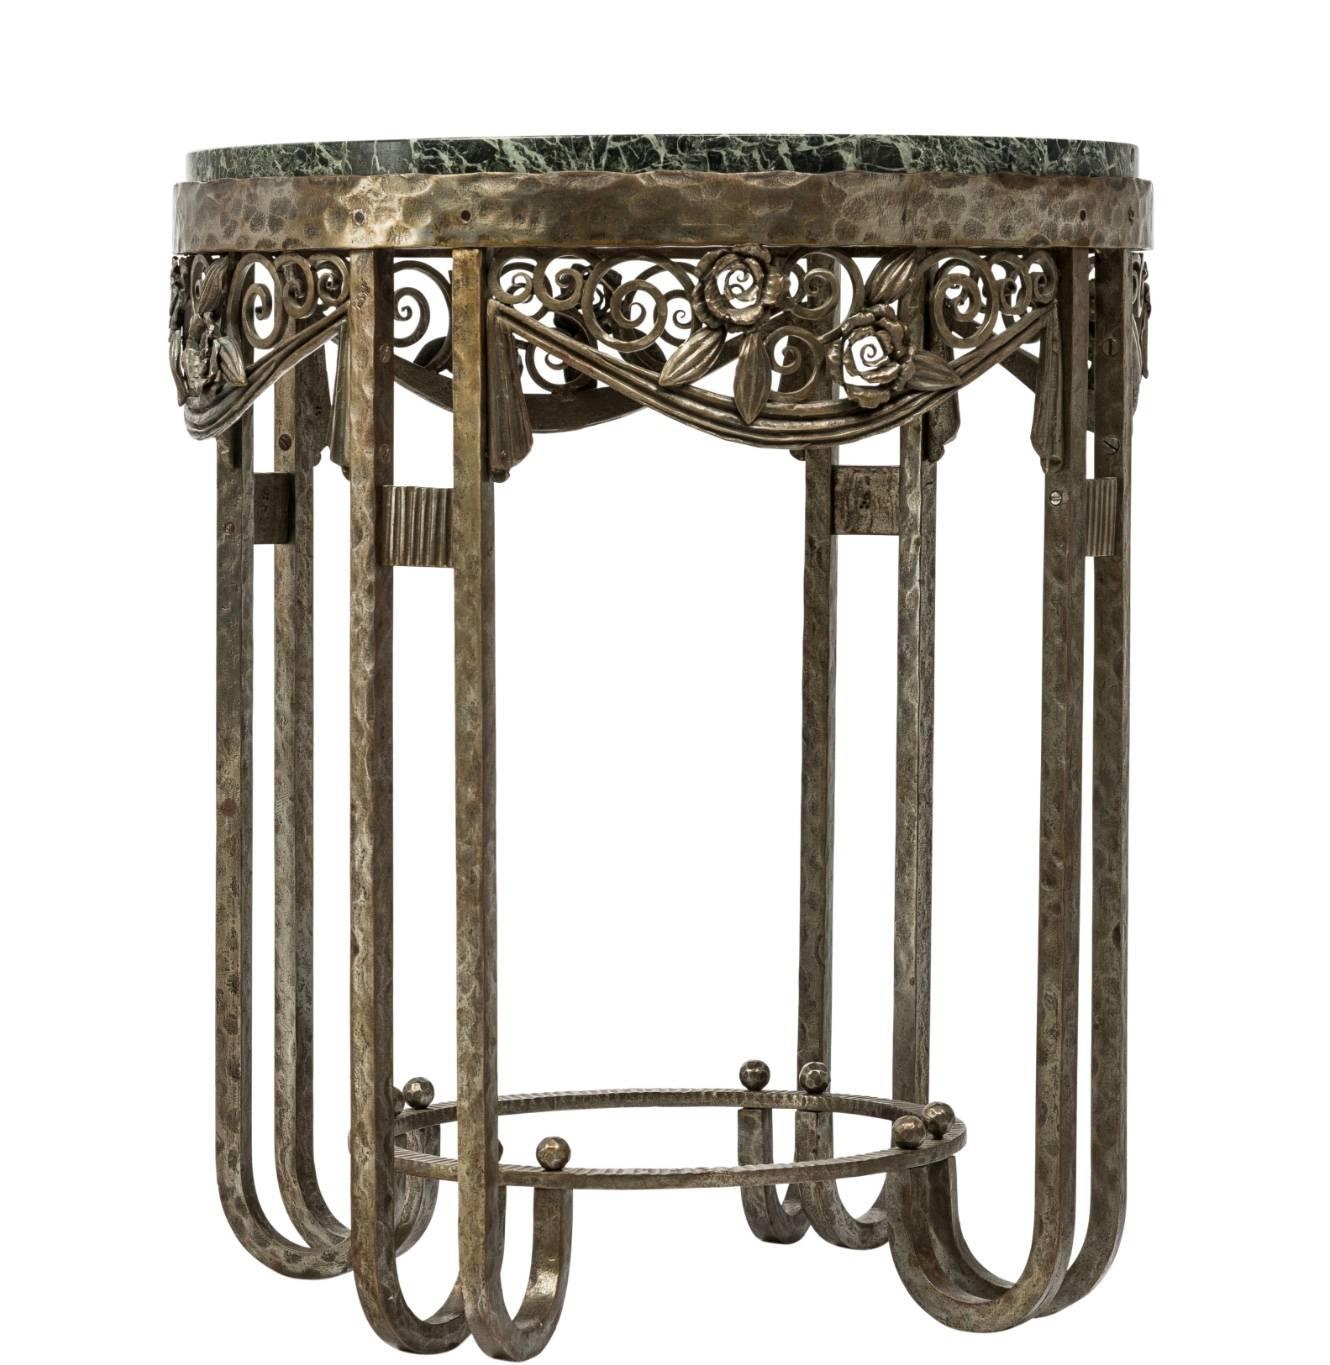 Stamped P. Kiss, Paris. A rare wrought iron and green marble round top console side table in exceptional condition with foliage and flower decorated aprons, circa 1930.

Measures: Height 24 inches
Diameter 20.5 inches.

Paul Kiss was a French artist